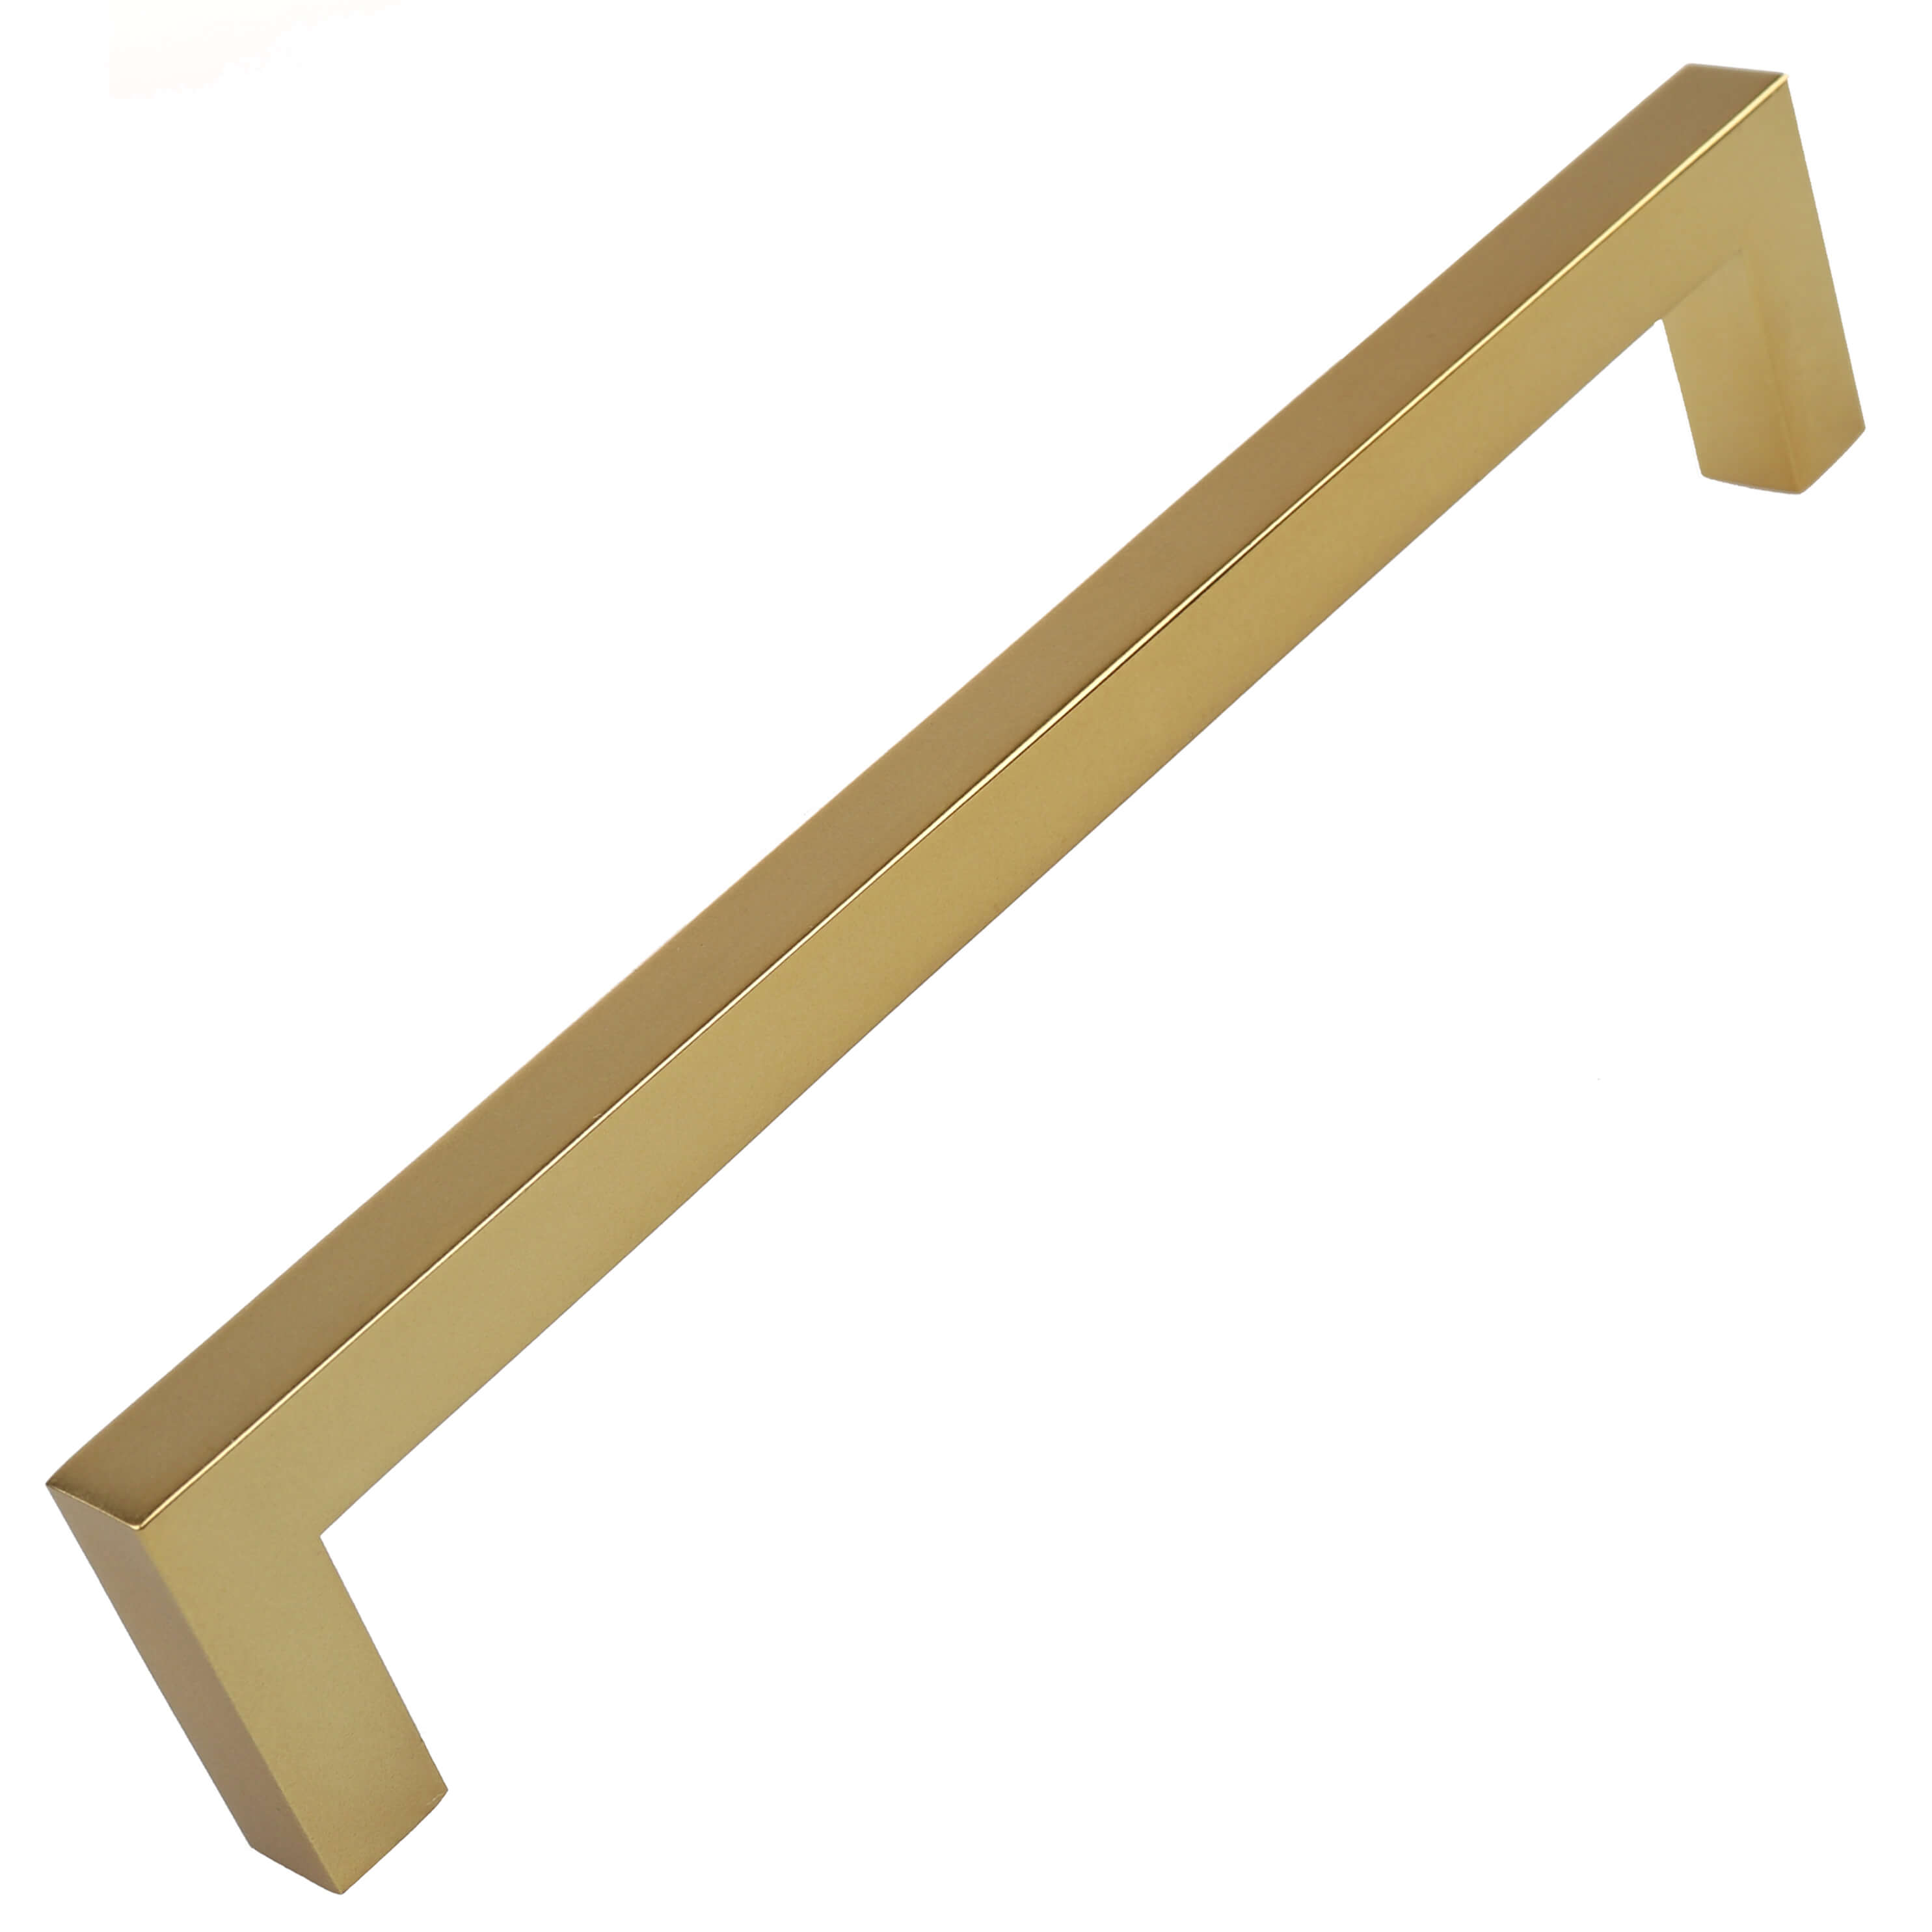 GlideRite 6-1/4 in. Center Solid Square Bar Cabinet Pulls, Brass Gold, Pack of 5 - image 1 of 3